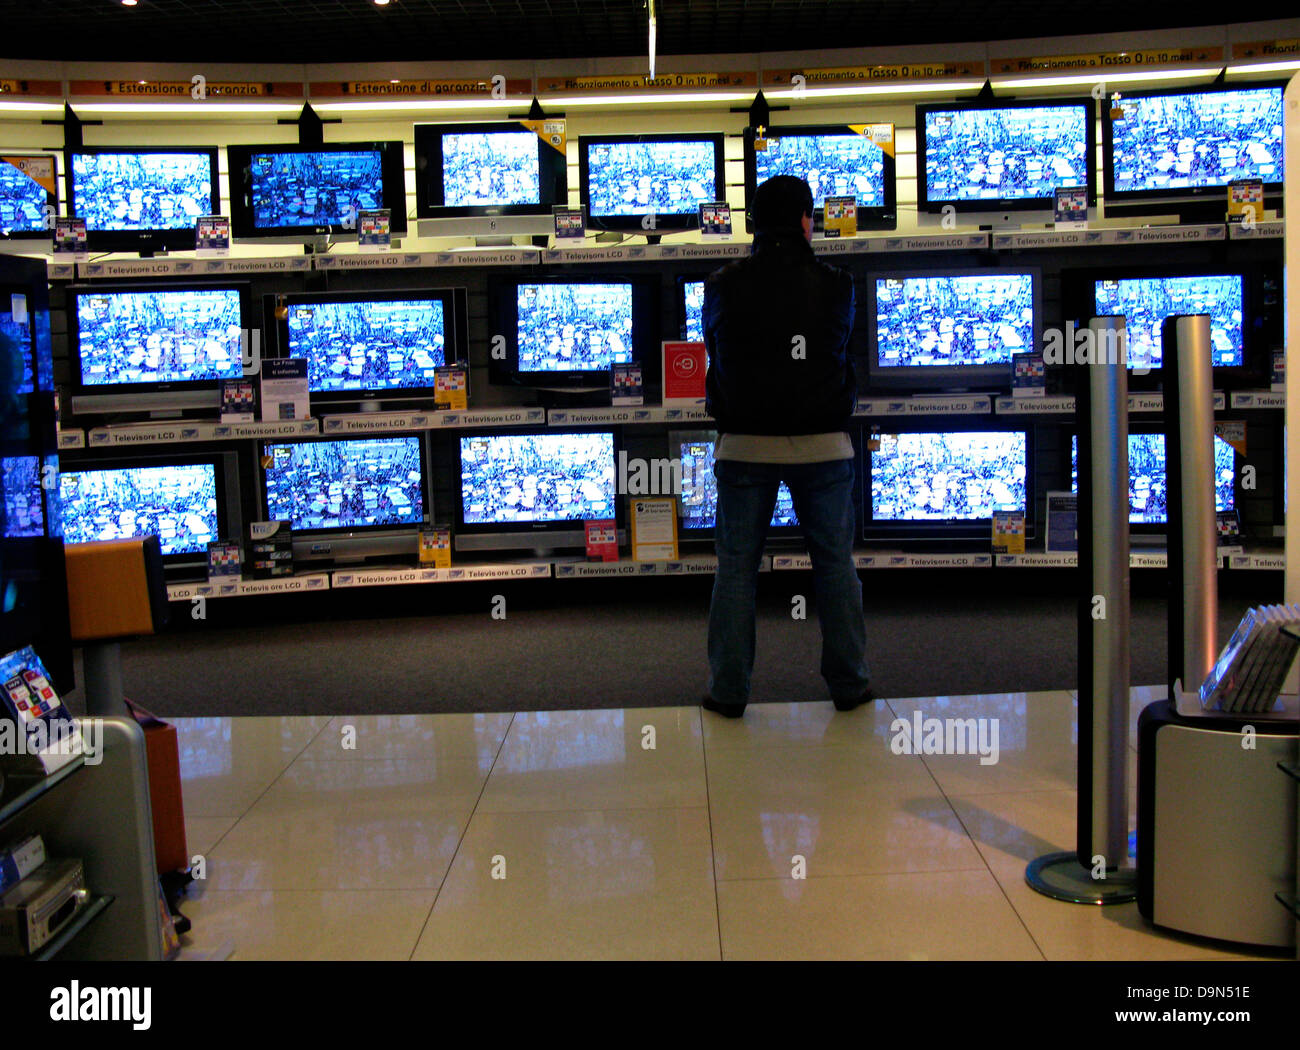 TV sets in shop display Stock Photo - Alamy